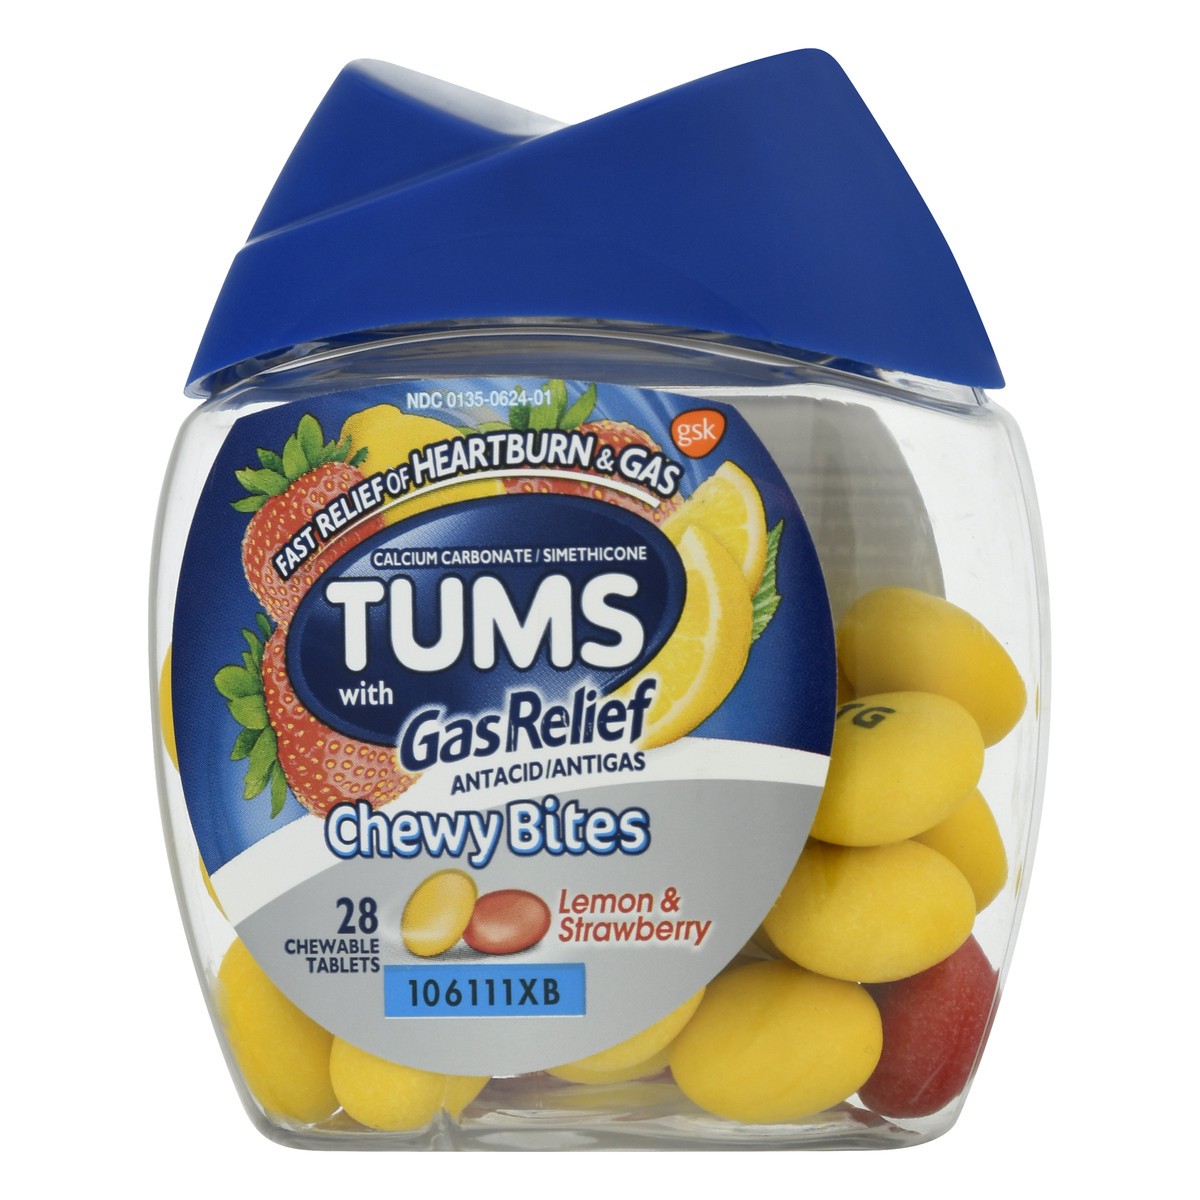 slide 3 of 9, Tums Chewable Tablets Lemon & Strawberry Gas Relief 28.0 ea, 28 ct